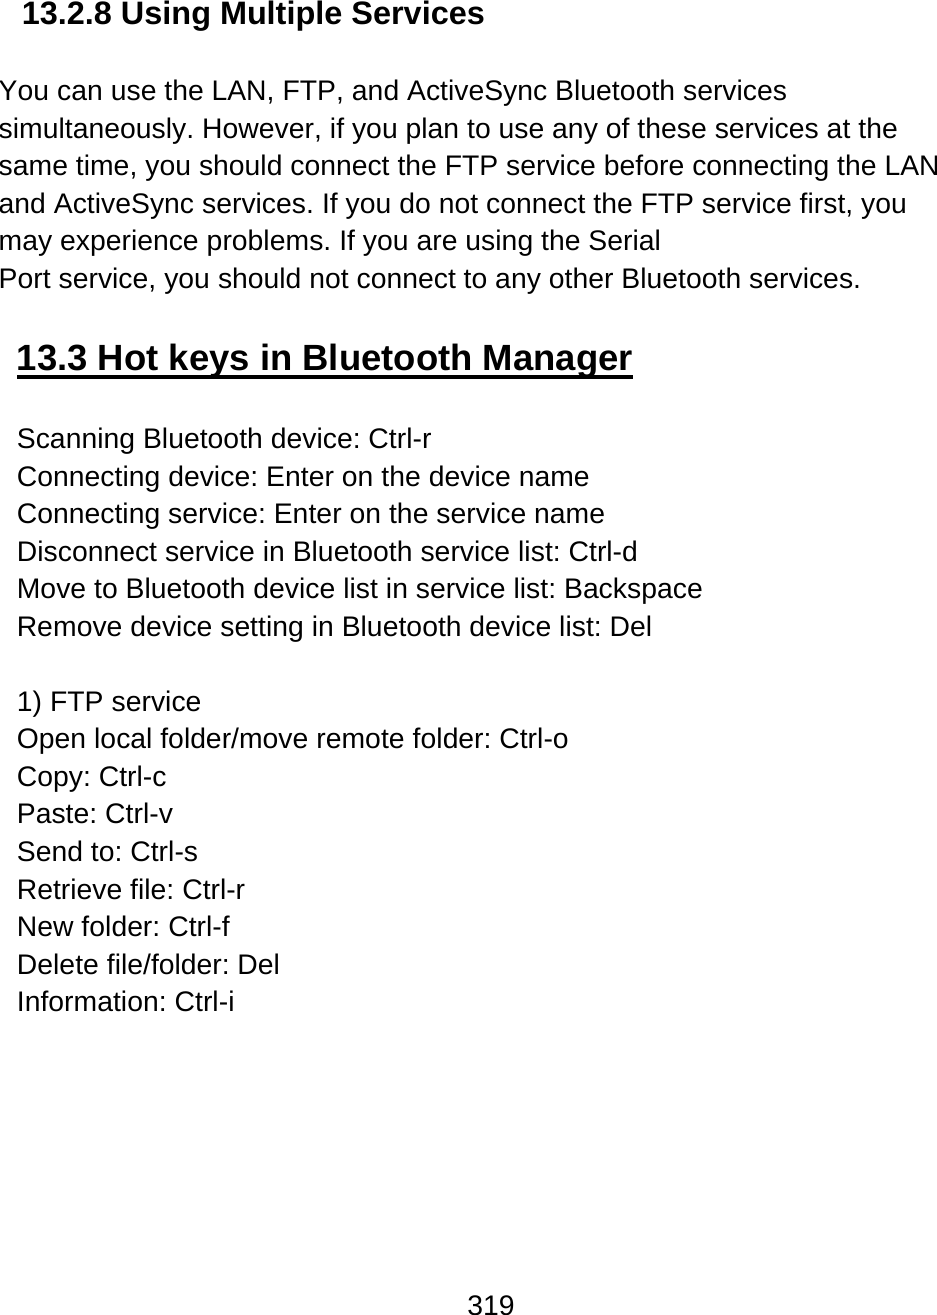 319  13.2.8 Using Multiple Services   You can use the LAN, FTP, and ActiveSync Bluetooth services simultaneously. However, if you plan to use any of these services at the same time, you should connect the FTP service before connecting the LAN and ActiveSync services. If you do not connect the FTP service first, you may experience problems. If you are using the Serial  Port service, you should not connect to any other Bluetooth services.  13.3 Hot keys in Bluetooth Manager  Scanning Bluetooth device: Ctrl-r Connecting device: Enter on the device name Connecting service: Enter on the service name Disconnect service in Bluetooth service list: Ctrl-d  Move to Bluetooth device list in service list: Backspace Remove device setting in Bluetooth device list: Del   1) FTP service Open local folder/move remote folder: Ctrl-o  Copy: Ctrl-c Paste: Ctrl-v  Send to: Ctrl-s Retrieve file: Ctrl-r New folder: Ctrl-f Delete file/folder: Del Information: Ctrl-i  